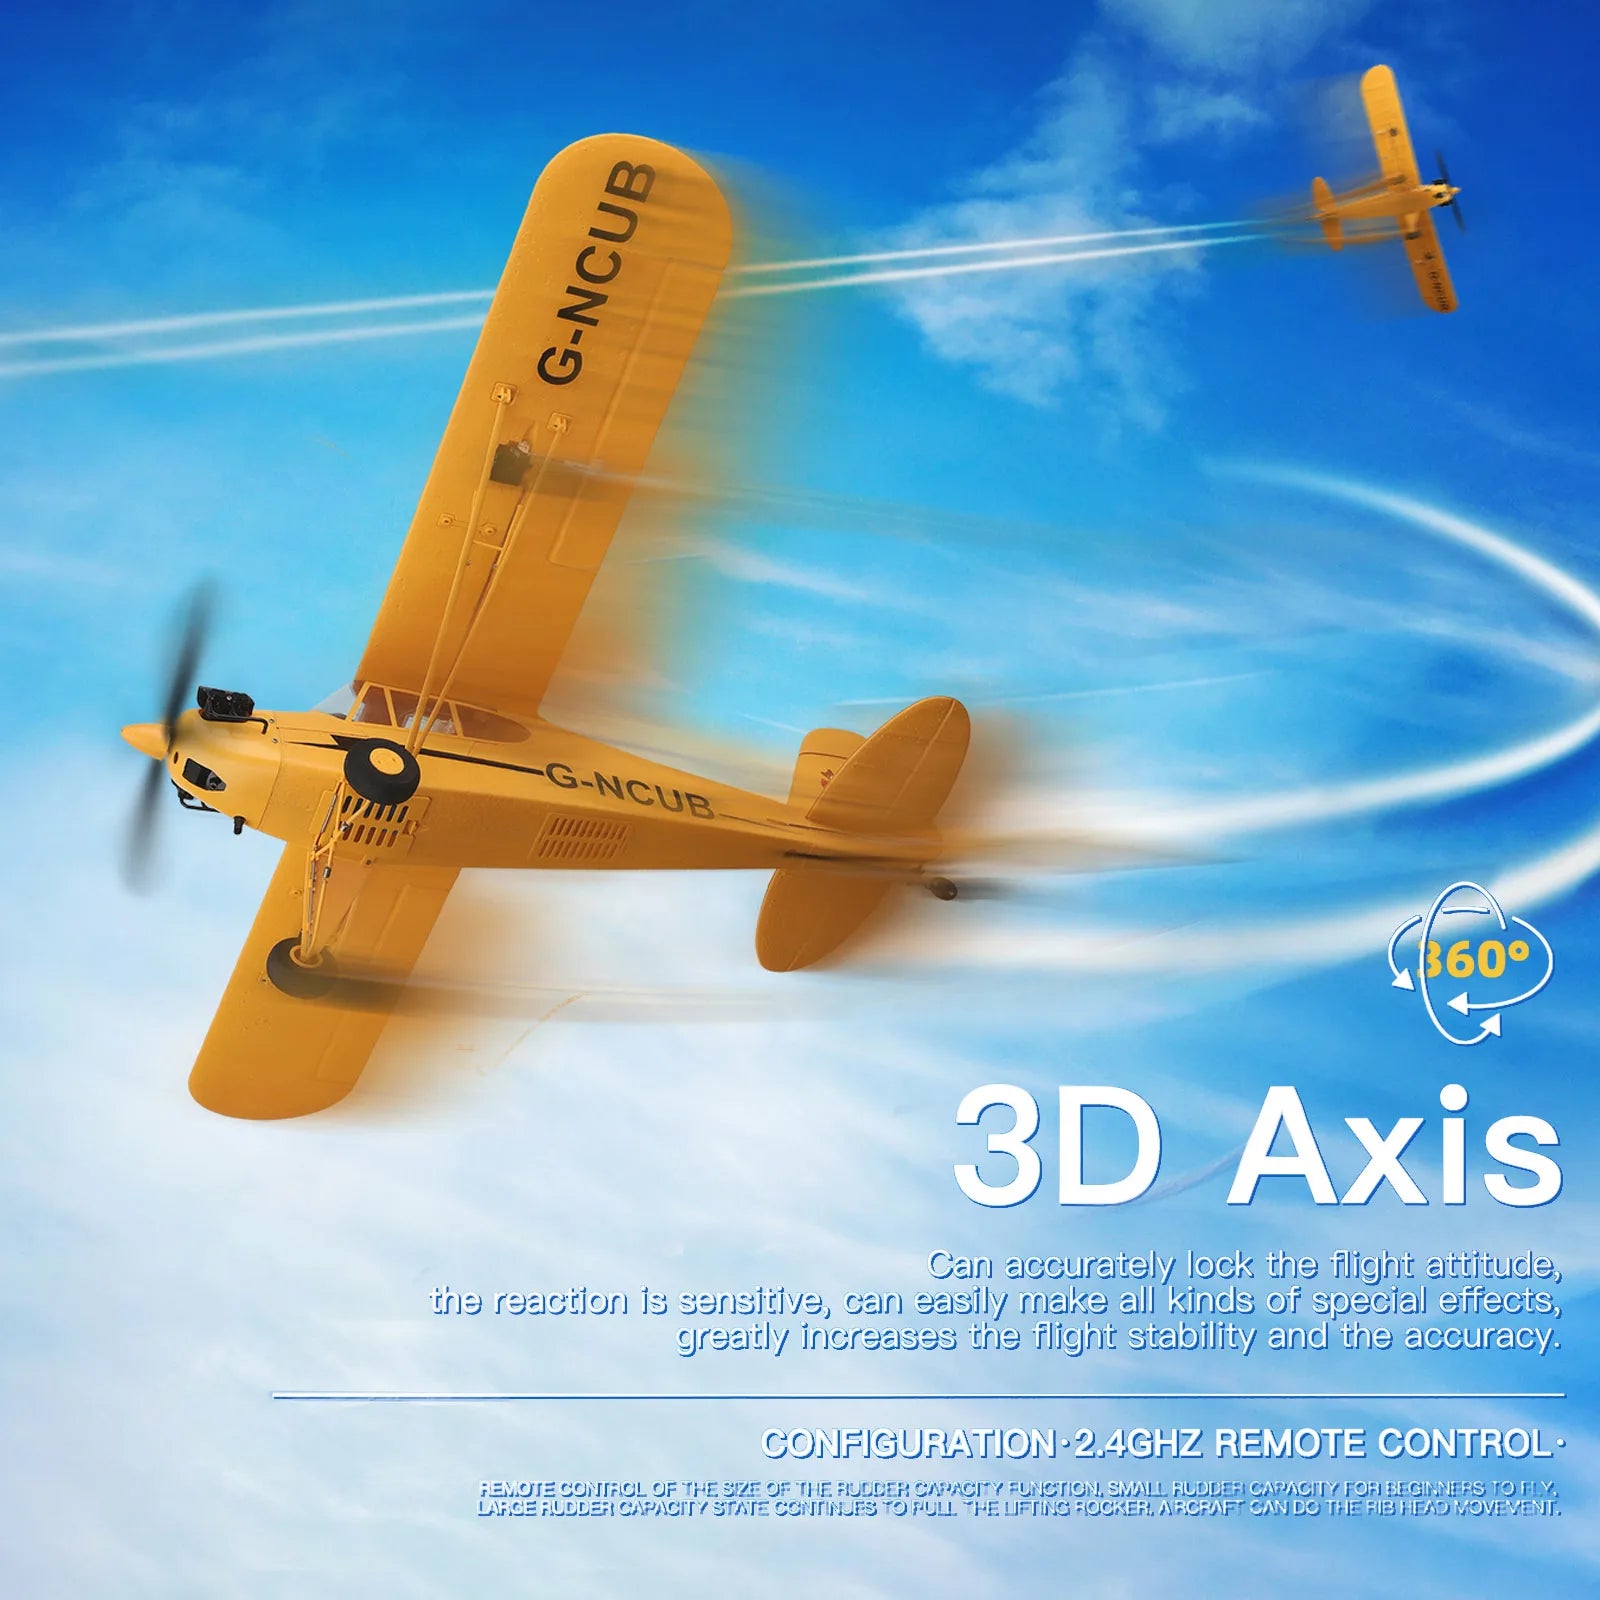 A160 RC Airplane, B60o 3D Axis Cari accurately lock the iflight attit